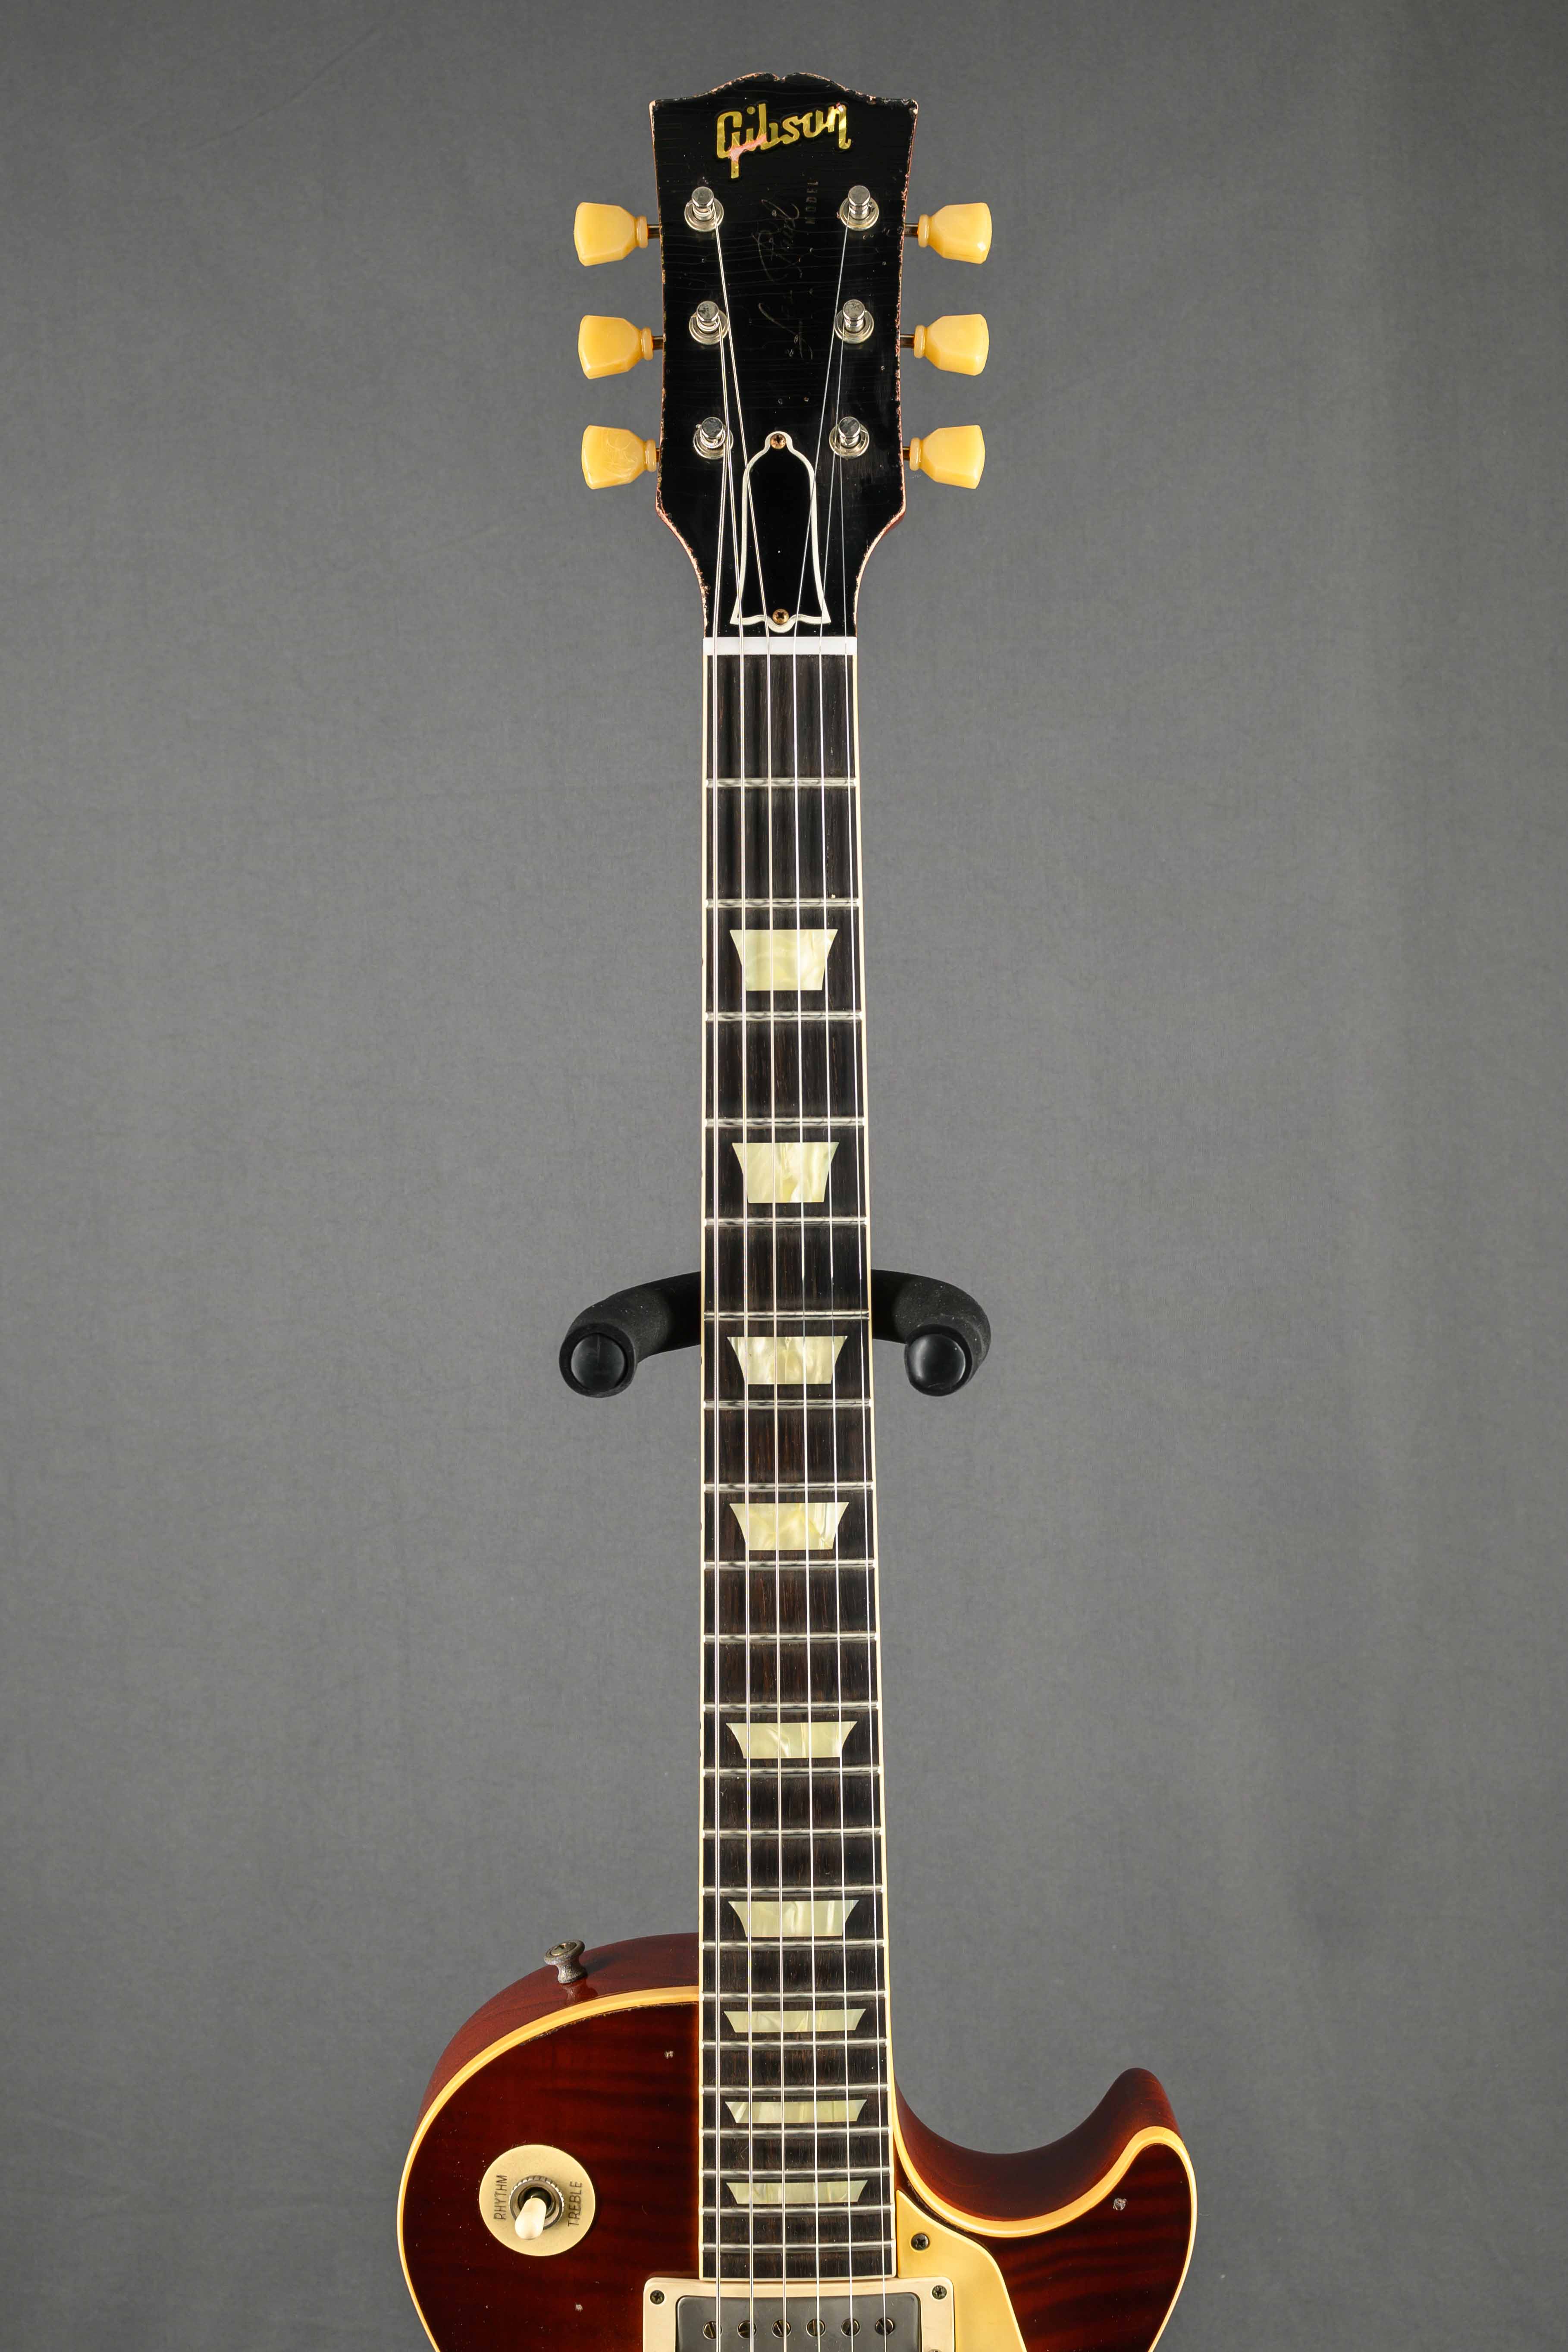 '59 Les Paul Standard Reissue Limited Edition Murphy Lab Aged with Brazilian Rosewood - Tom's Dark Burst